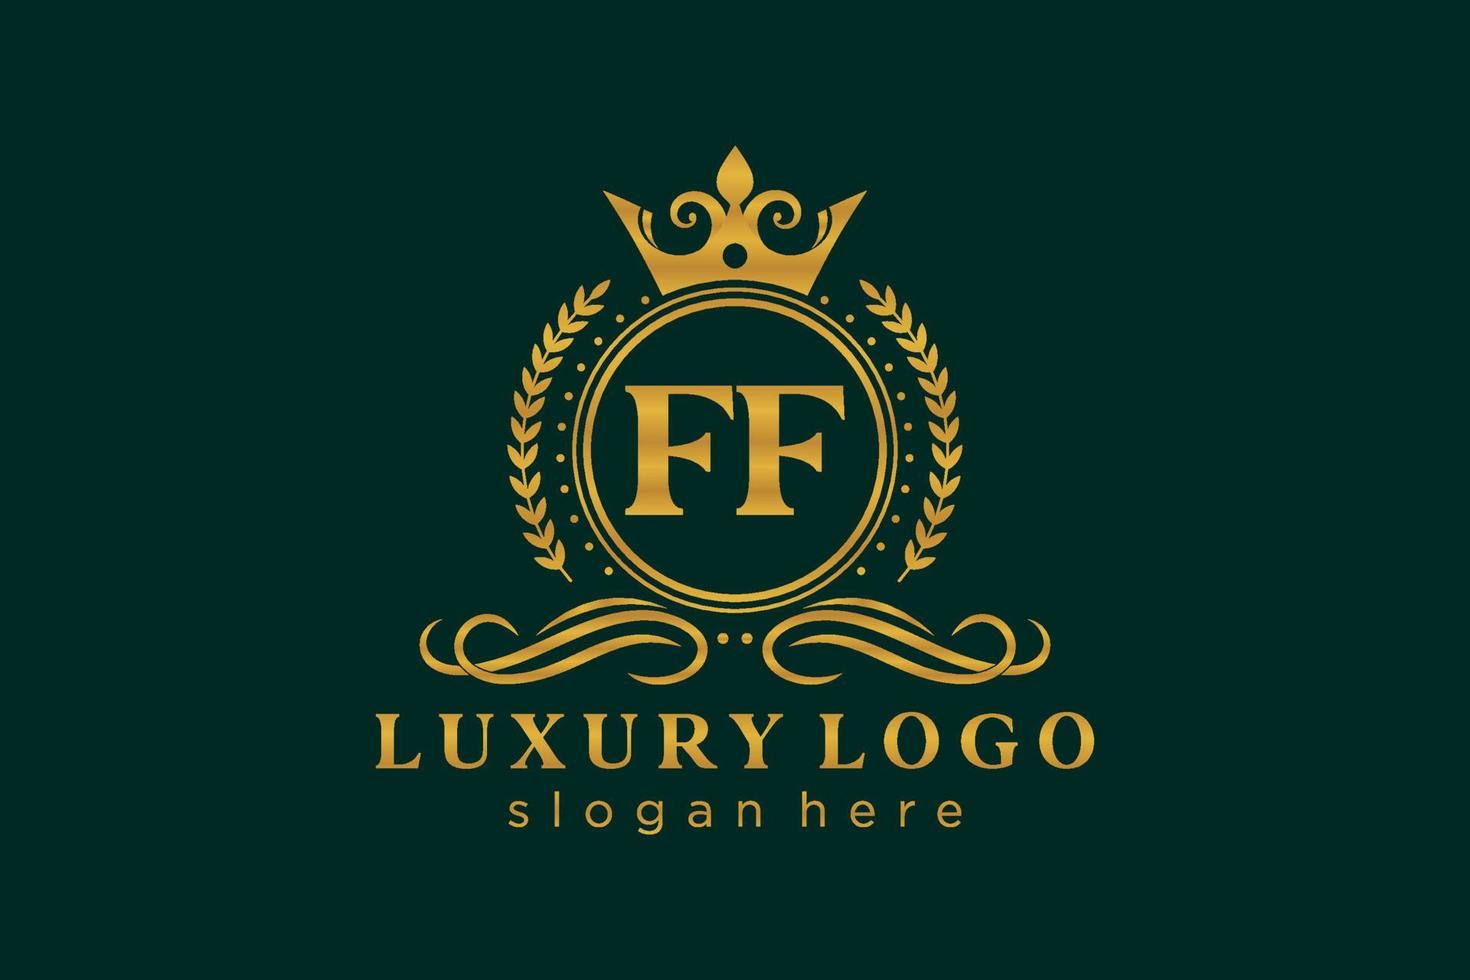 Initial FF Letter Royal Luxury Logo template in vector art for Restaurant, Royalty, Boutique, Cafe, Hotel, Heraldic, Jewelry, Fashion and other vector illustration.